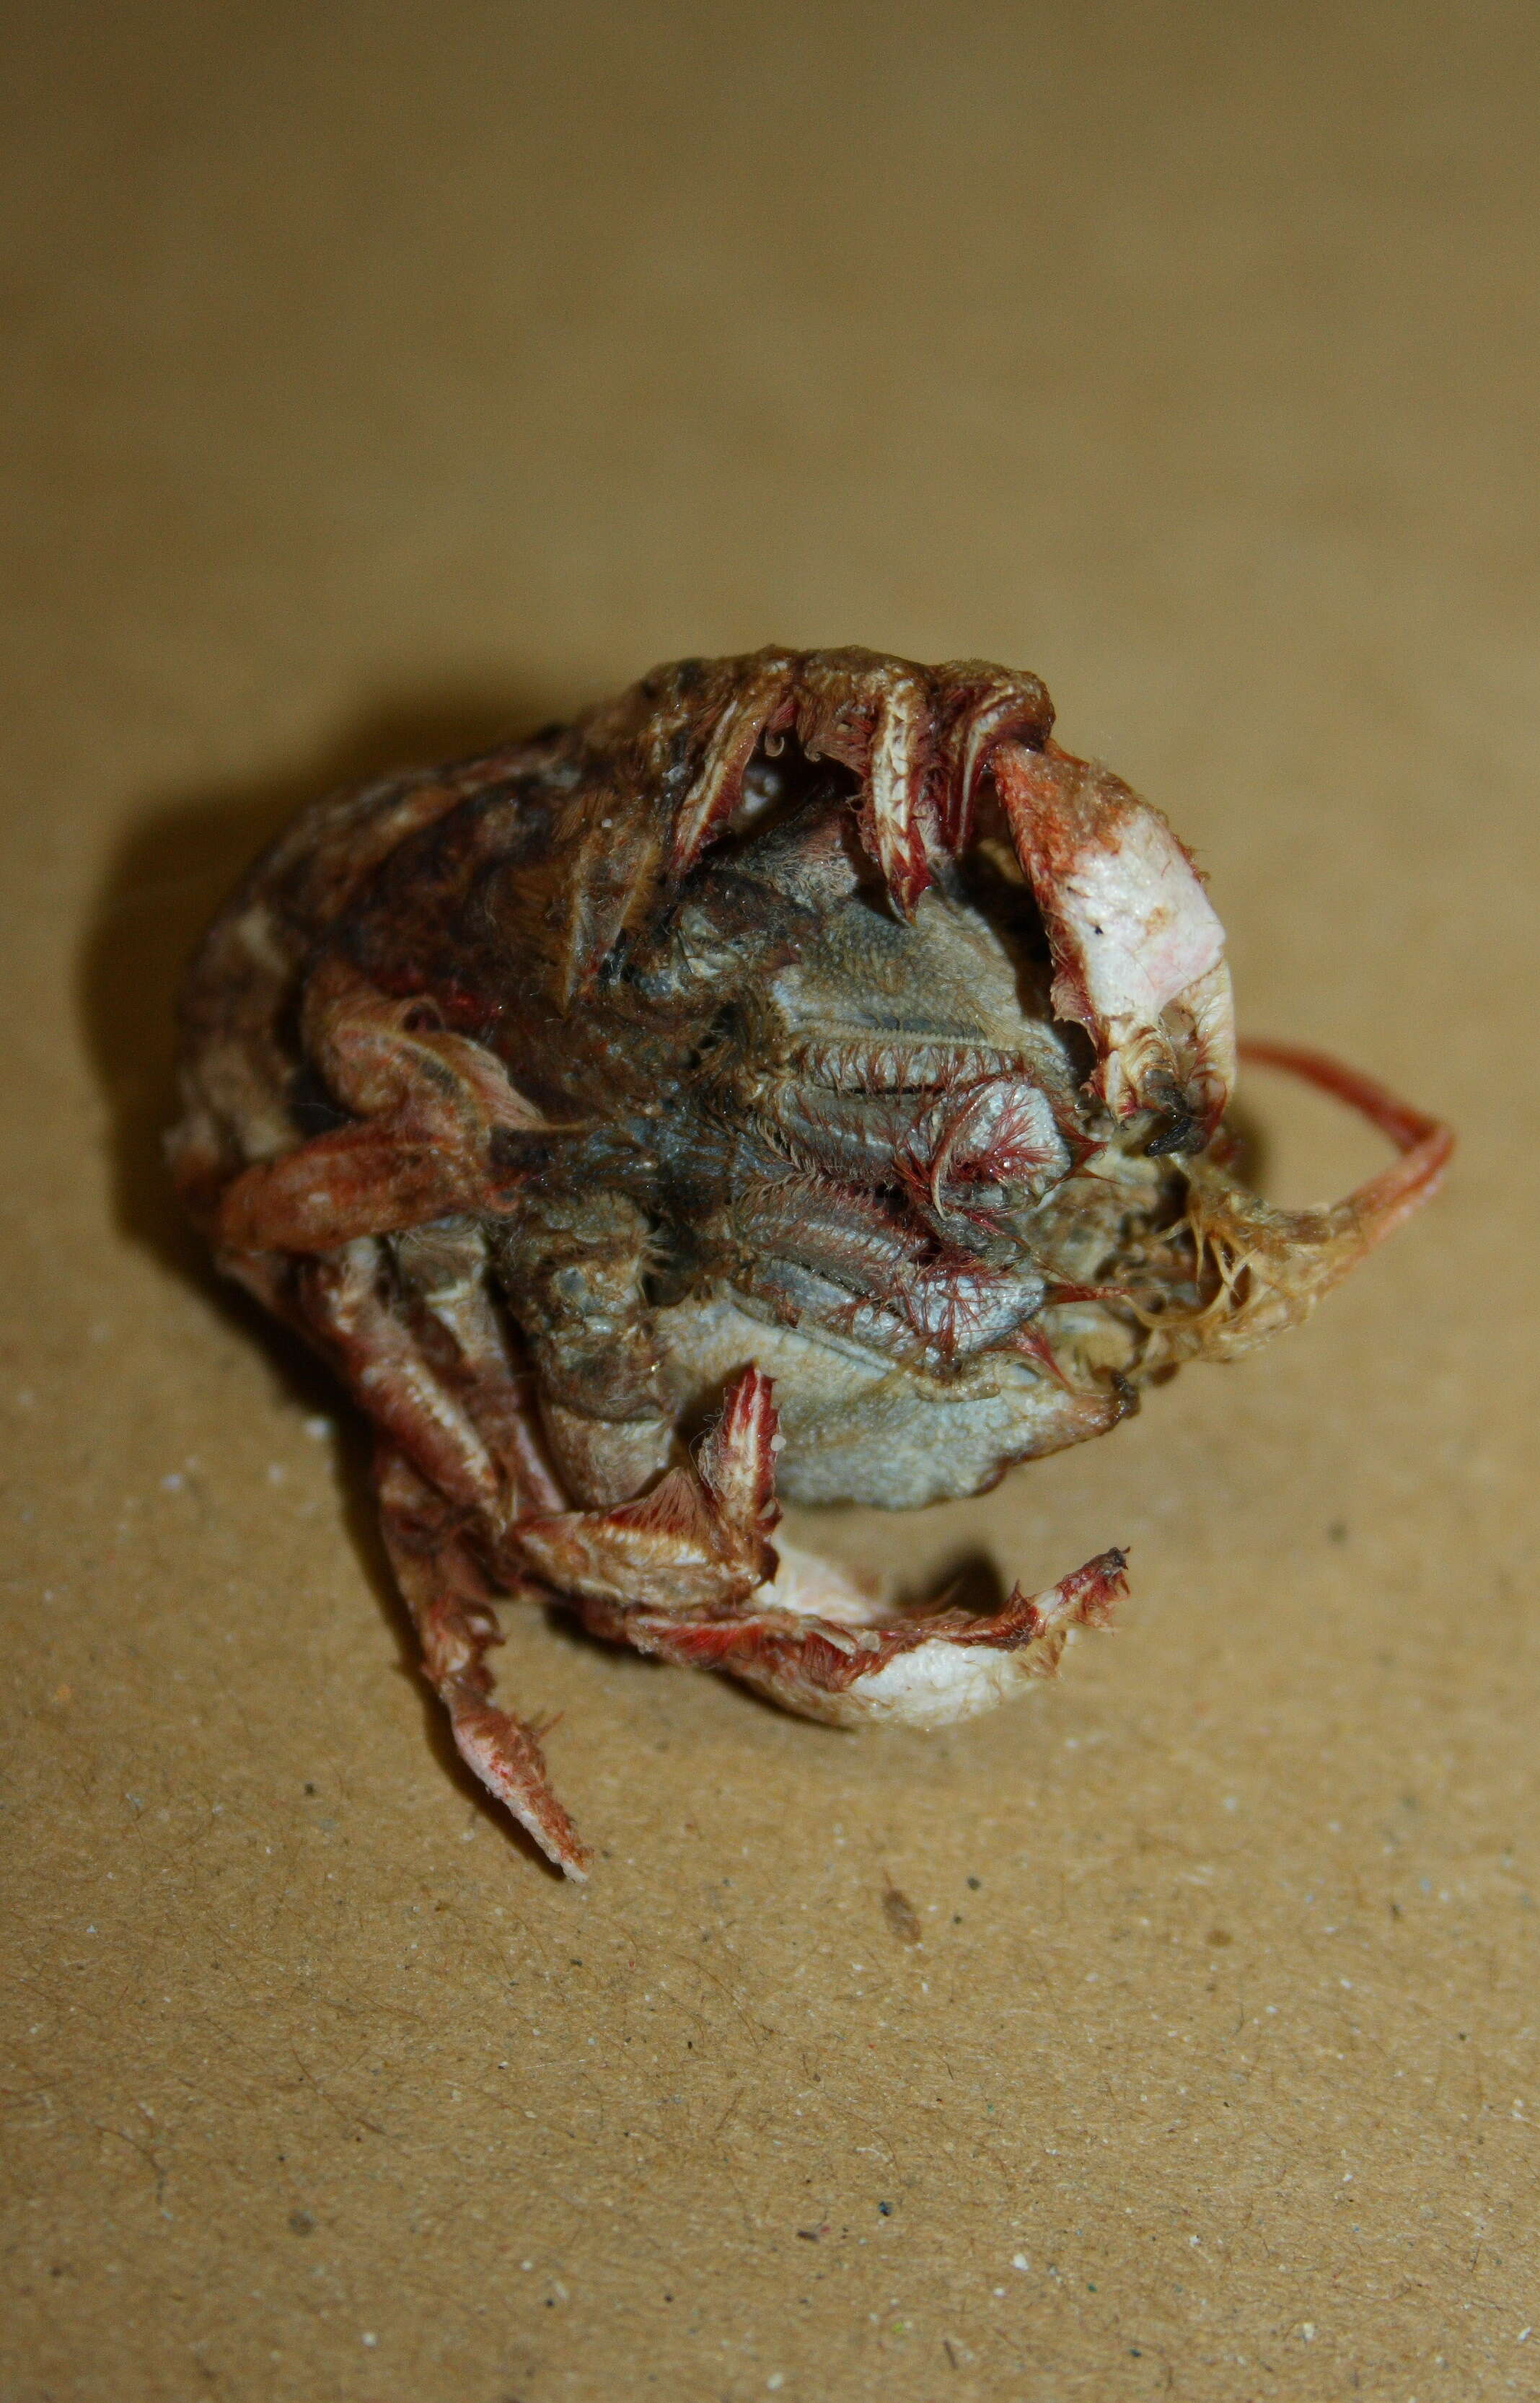 Image of masked crabs